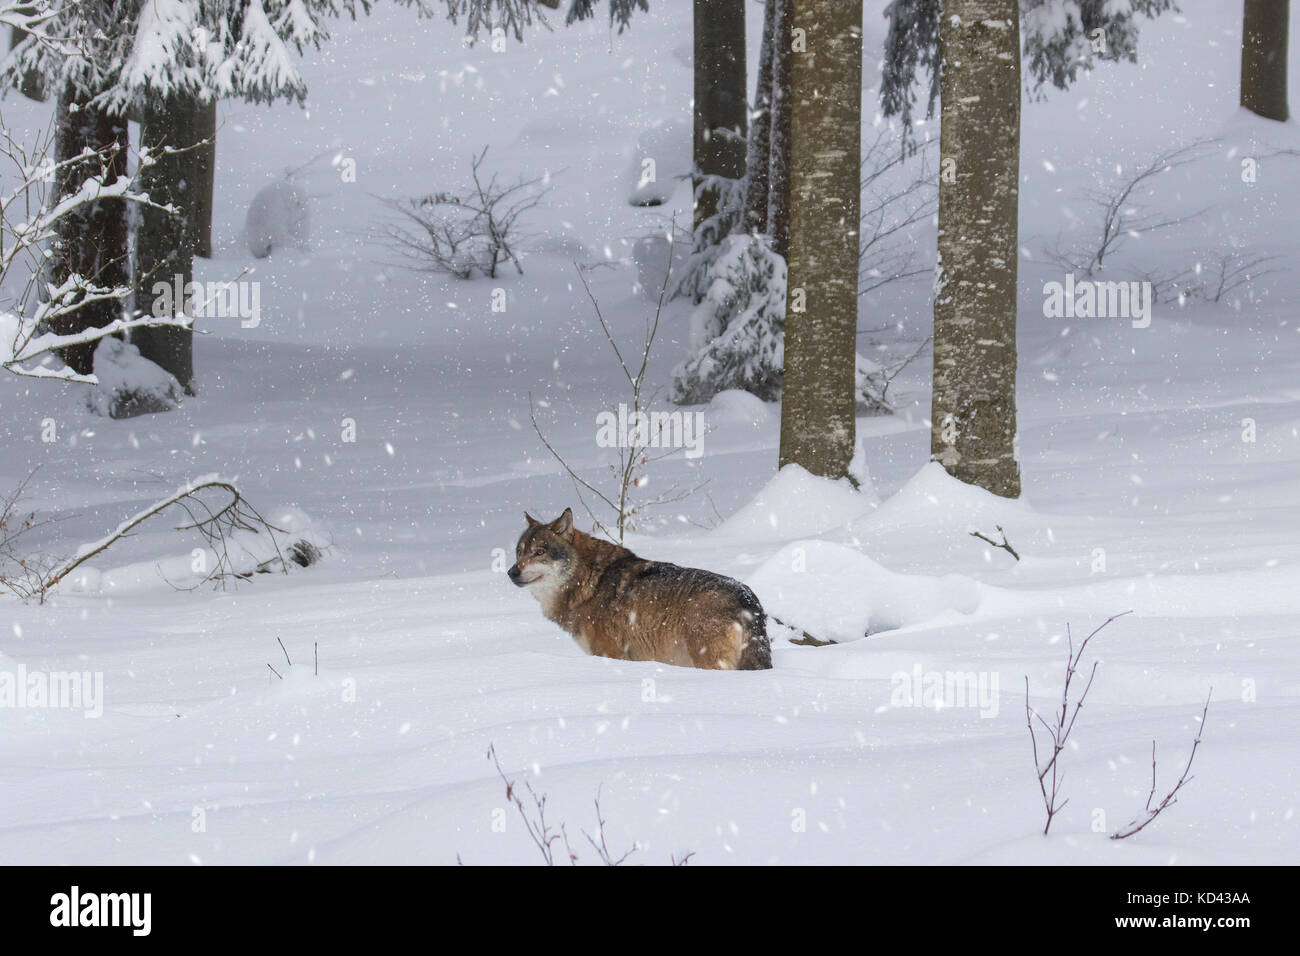 Gray wolf / grey wolf (Canis lupus) foraging in the snow in forest during snowfall in winter Stock Photo